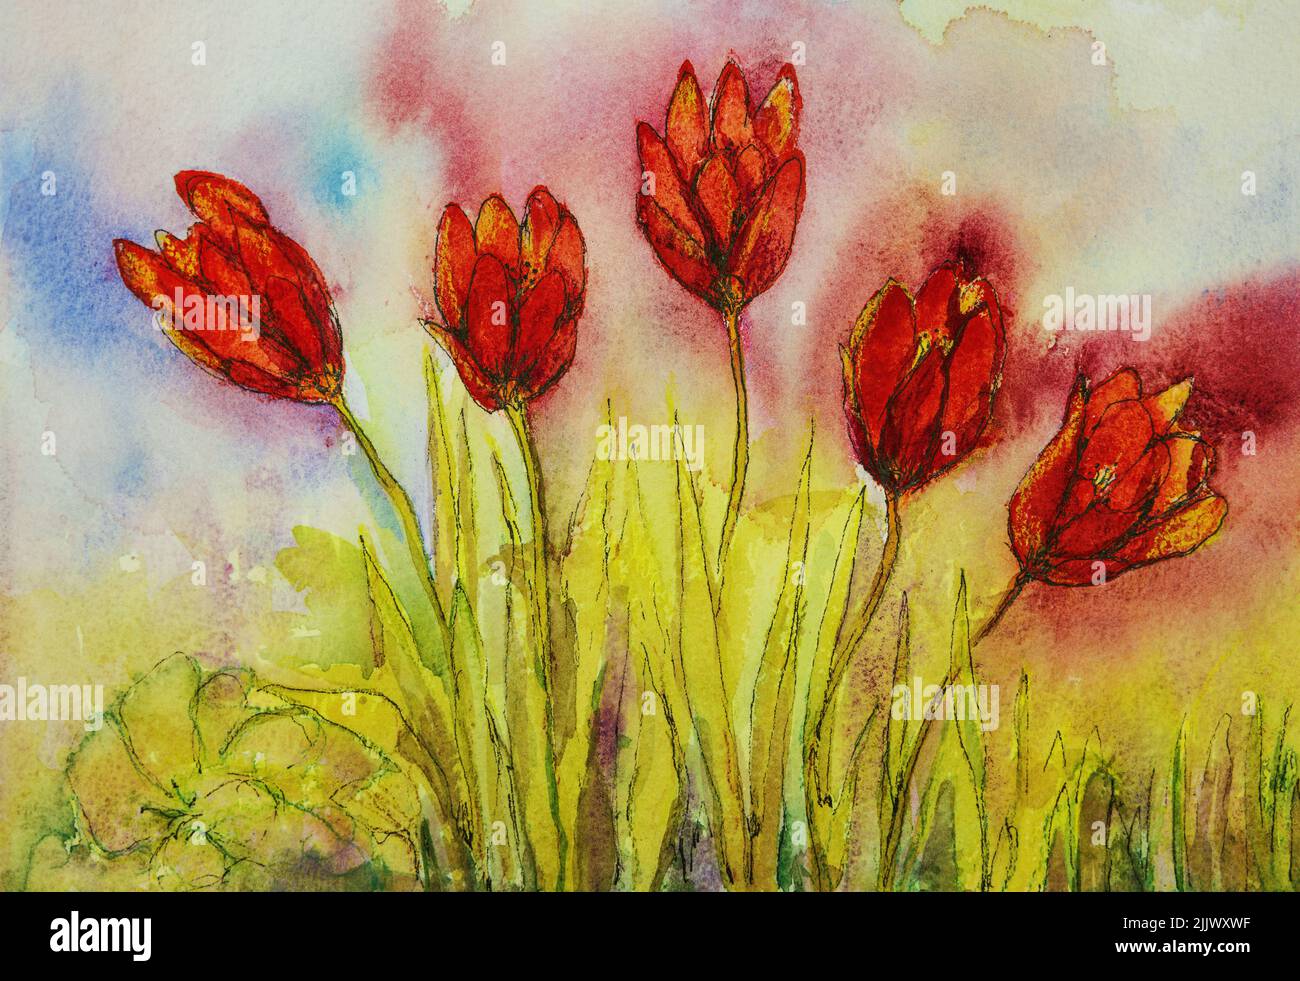 Doodled  red tulips in gras. The dabbing technique near the edges gives a soft focus effect due to the altered surface roughness of the paper. Stock Photo